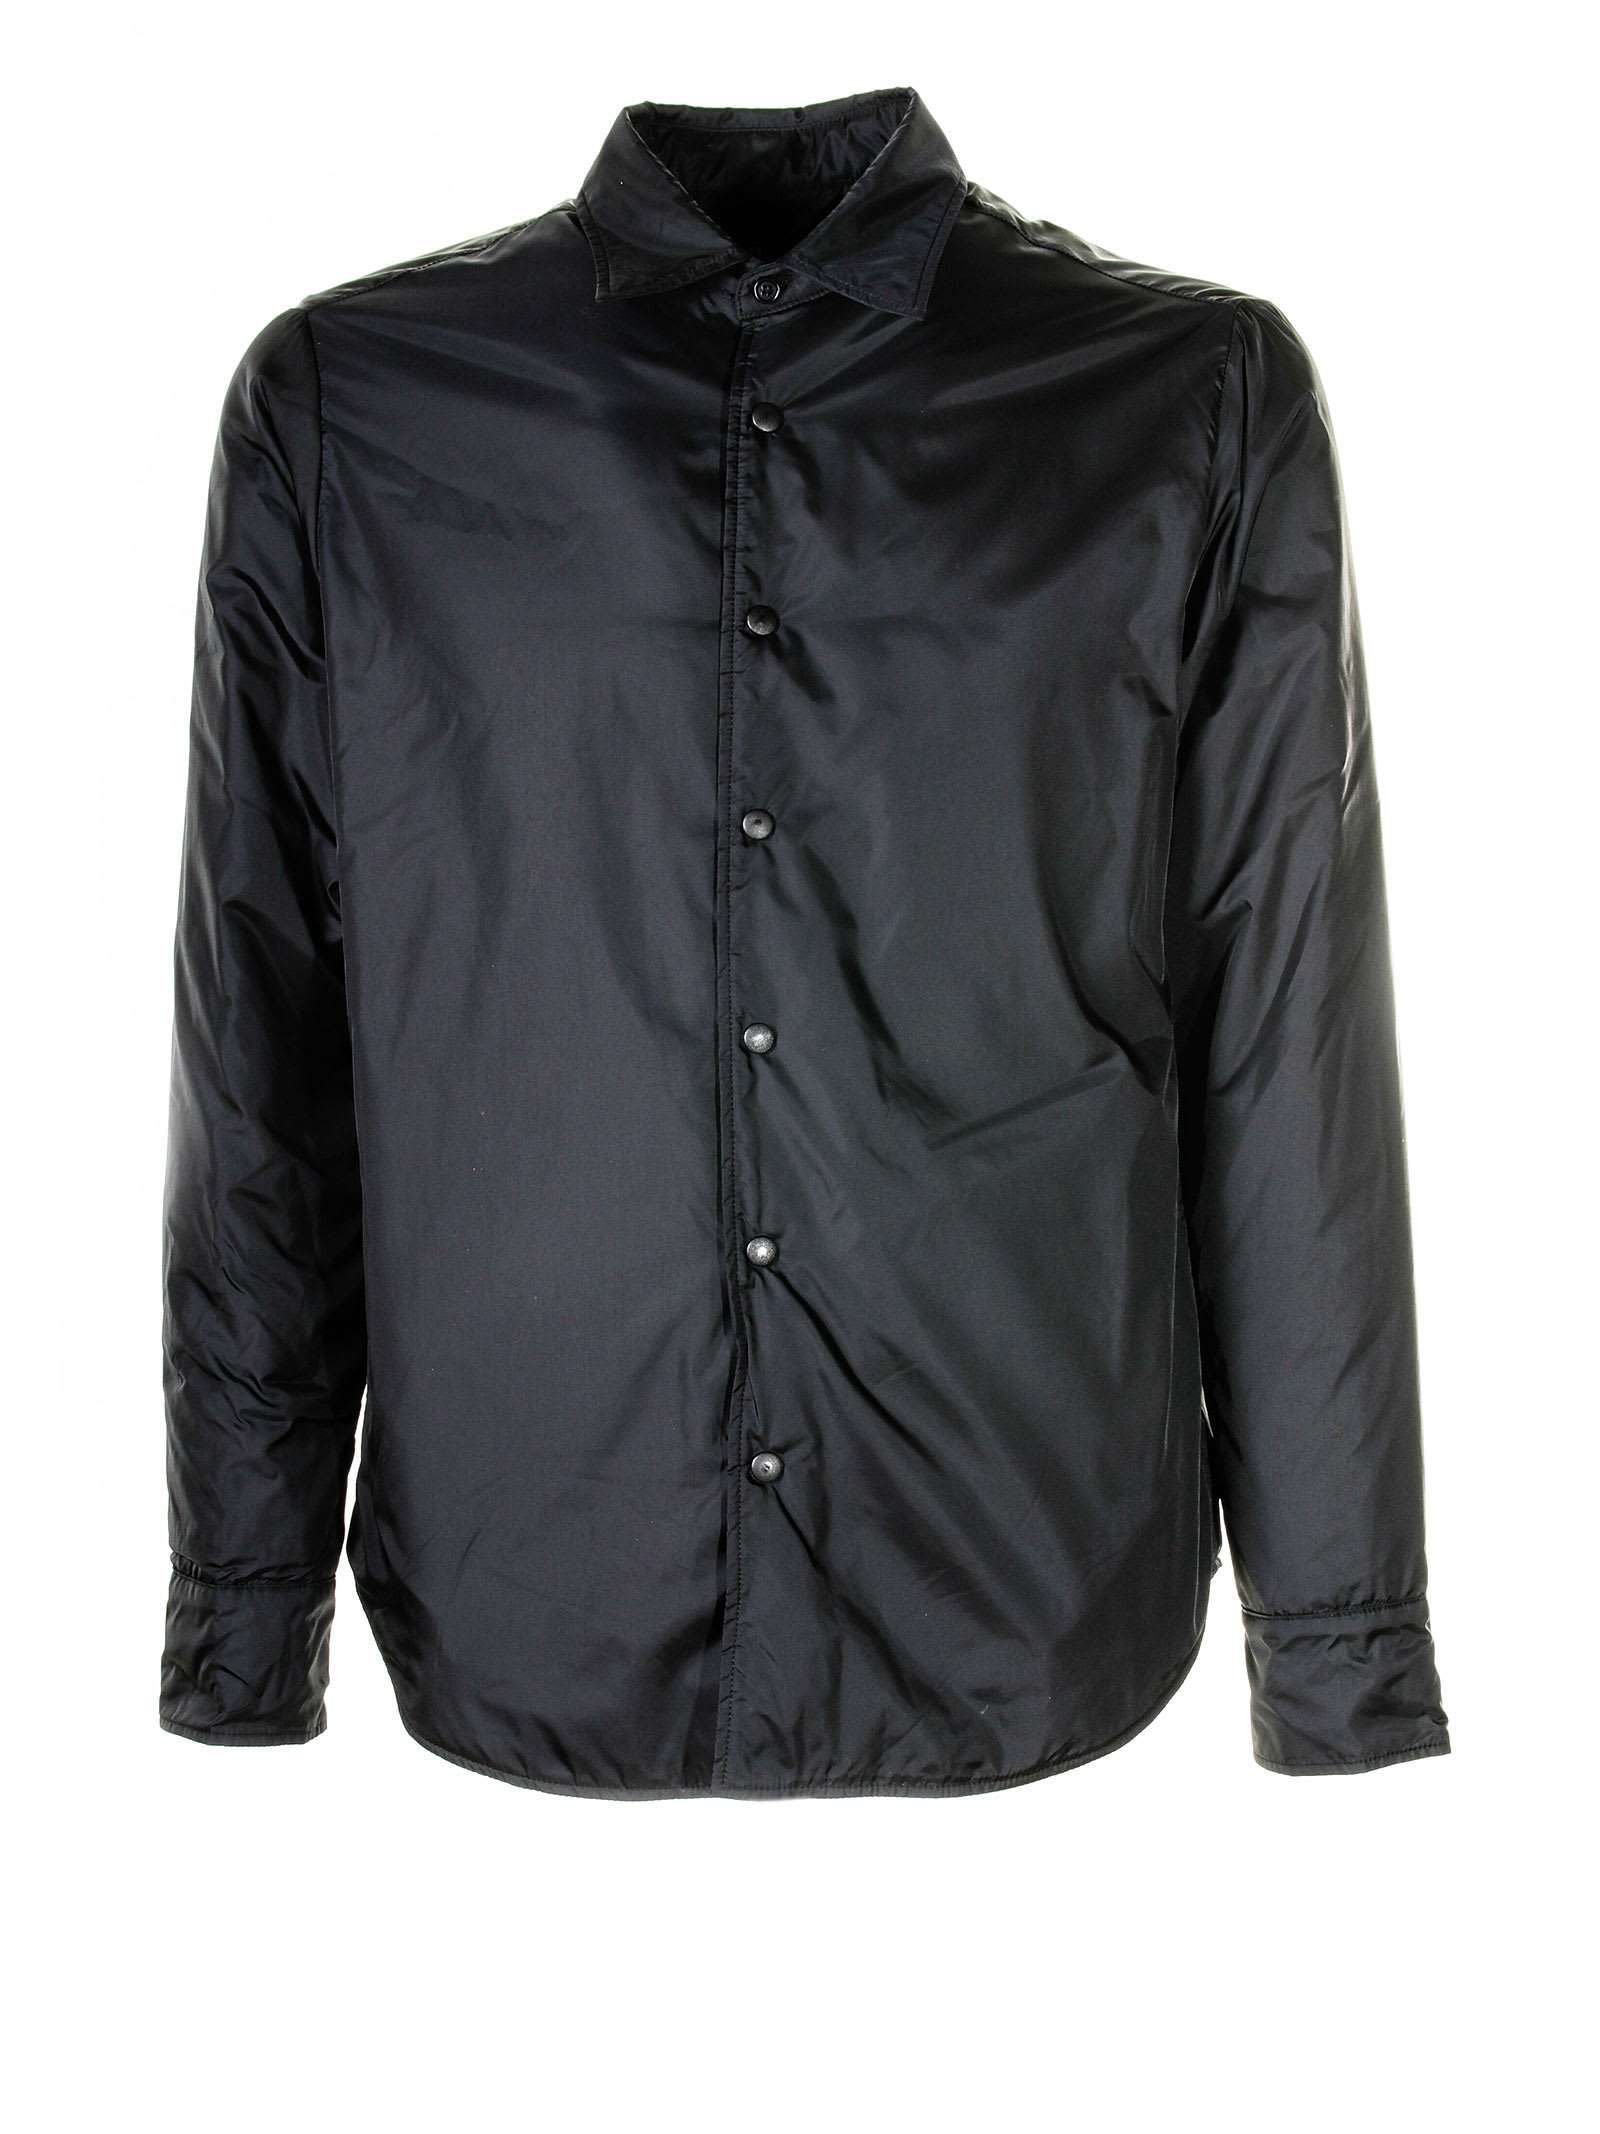 Aspesi Shirt Jacket With Buttons In Black Nero